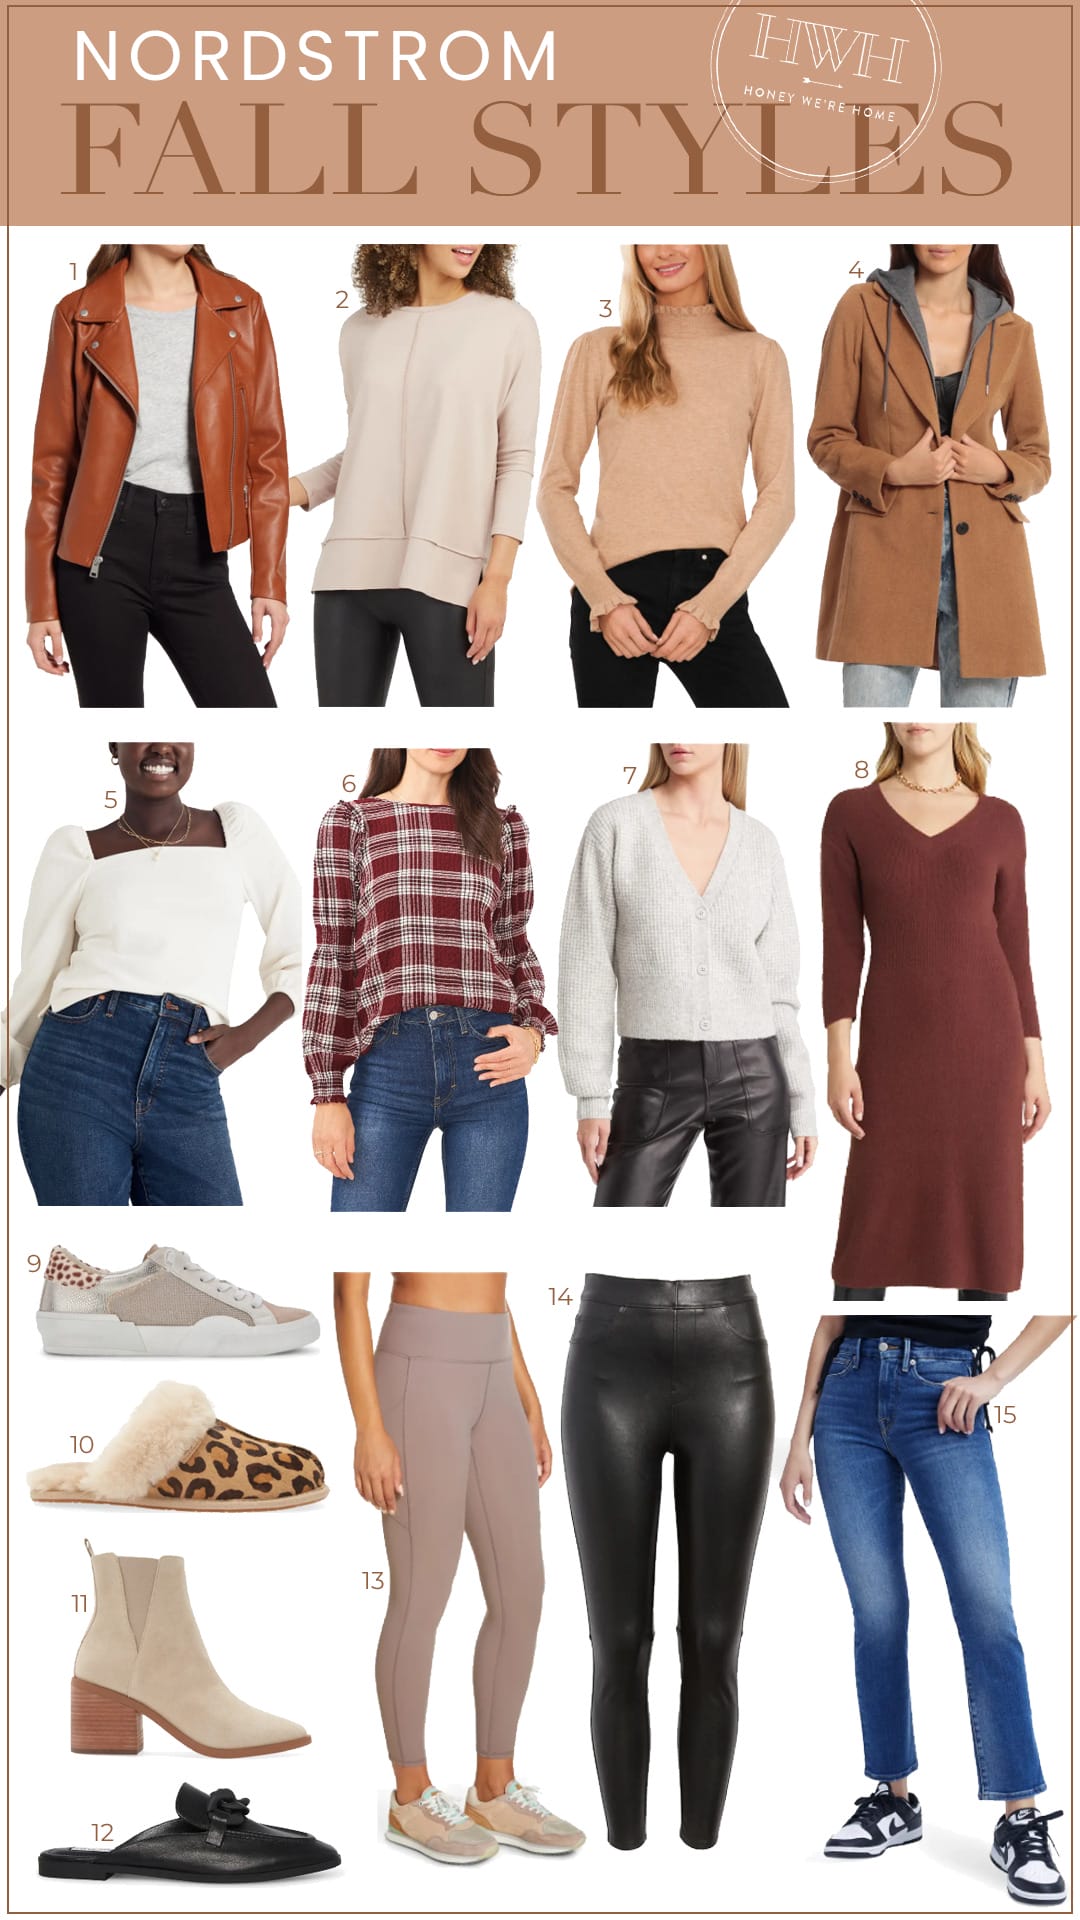 Nordstrom Fall Styles 